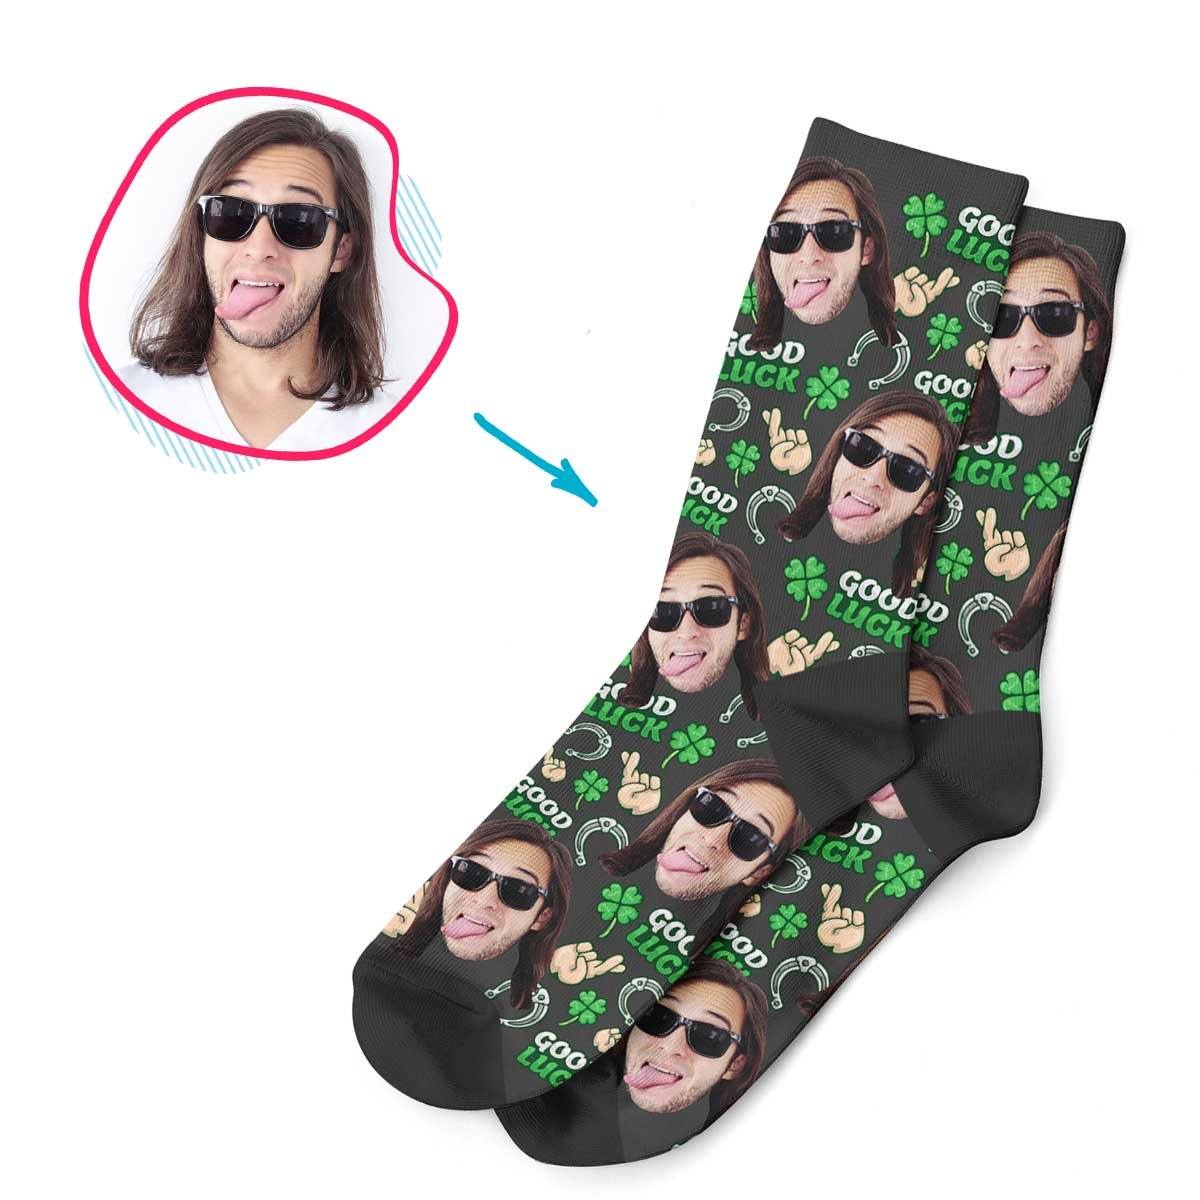 Dark Good Luck personalized socks with photo of face printed on them